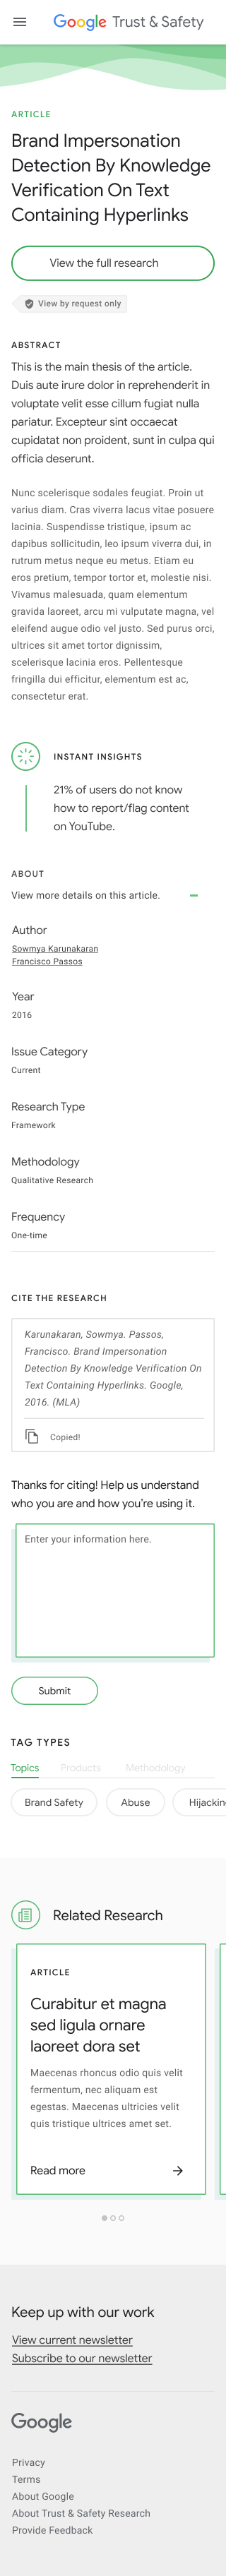 Mobile version of a Research Article Detail page, with the citation form launched.